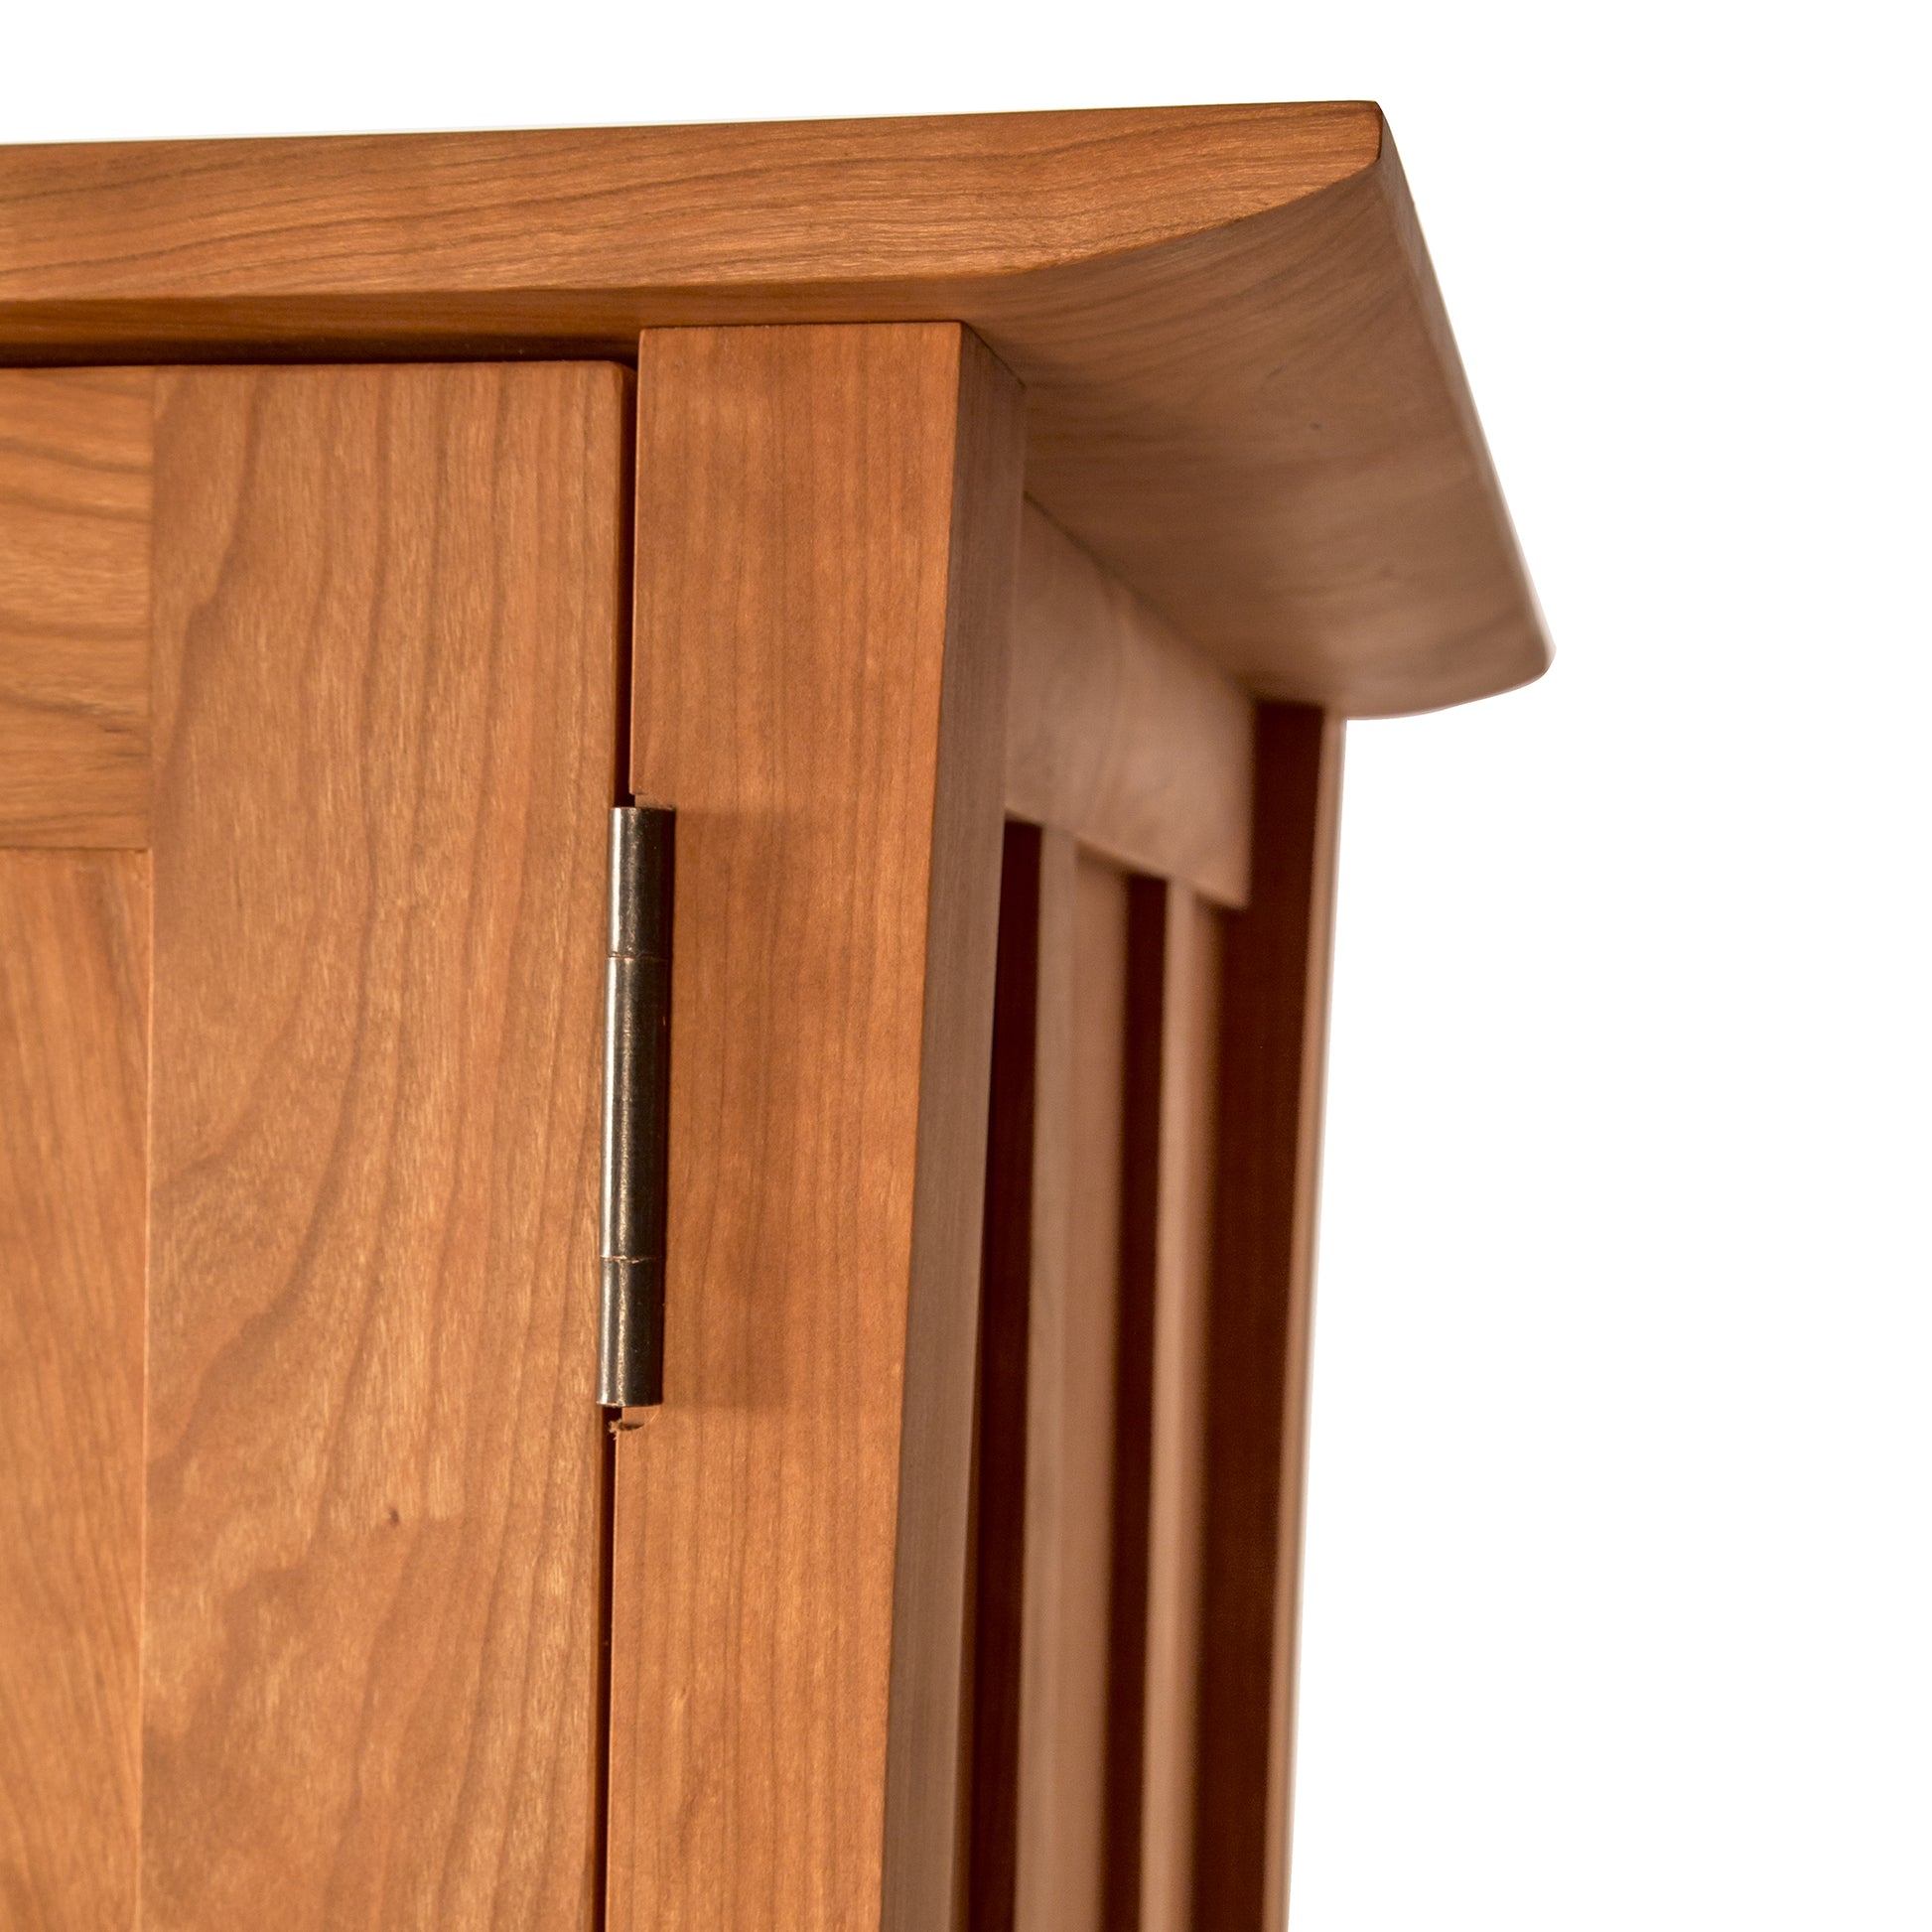 Close-up of a Vermont Furniture Designs Contemporary Craftsman Tall Storage Chest corner showing the detailed craftsmanship, hinge, and grain of the wood, complemented by an eco-friendly oil finish.